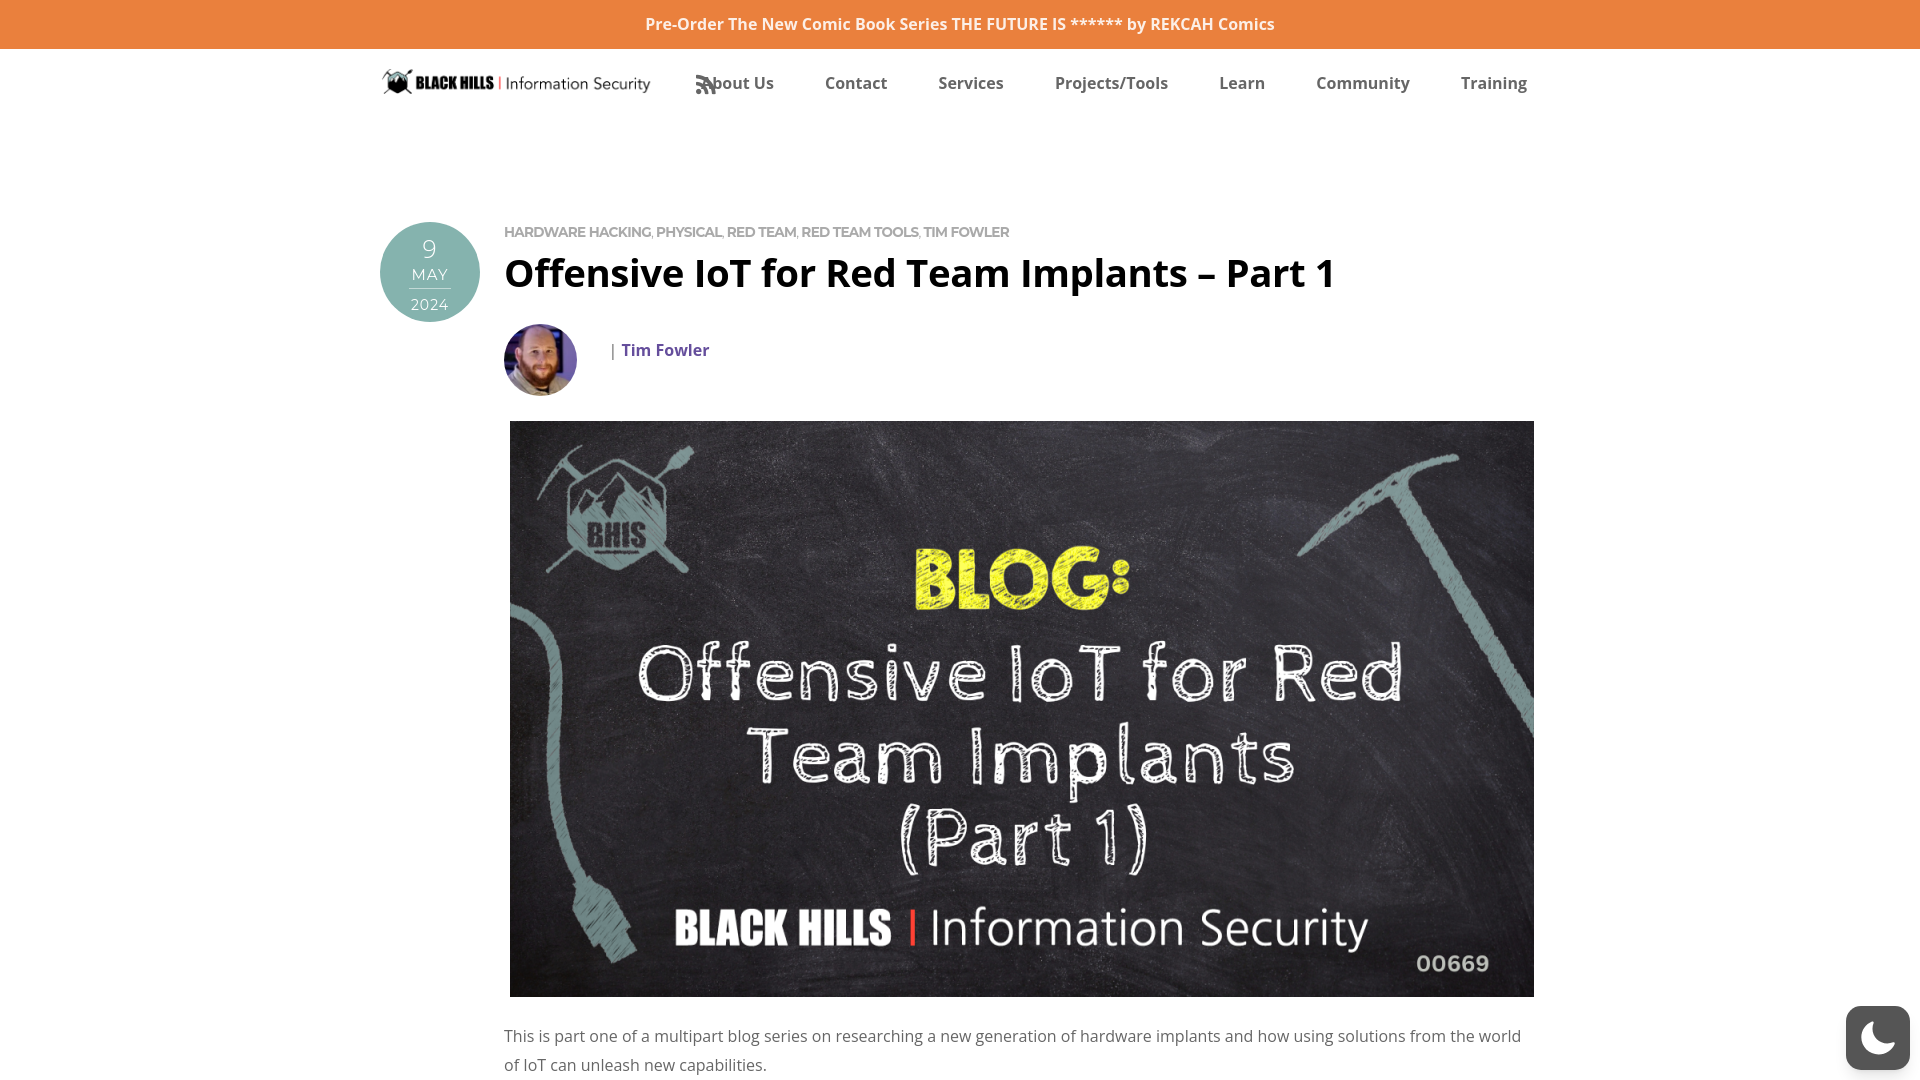 Offensive IoT for Red Team Implants - Part 1 - Black Hills Information Security